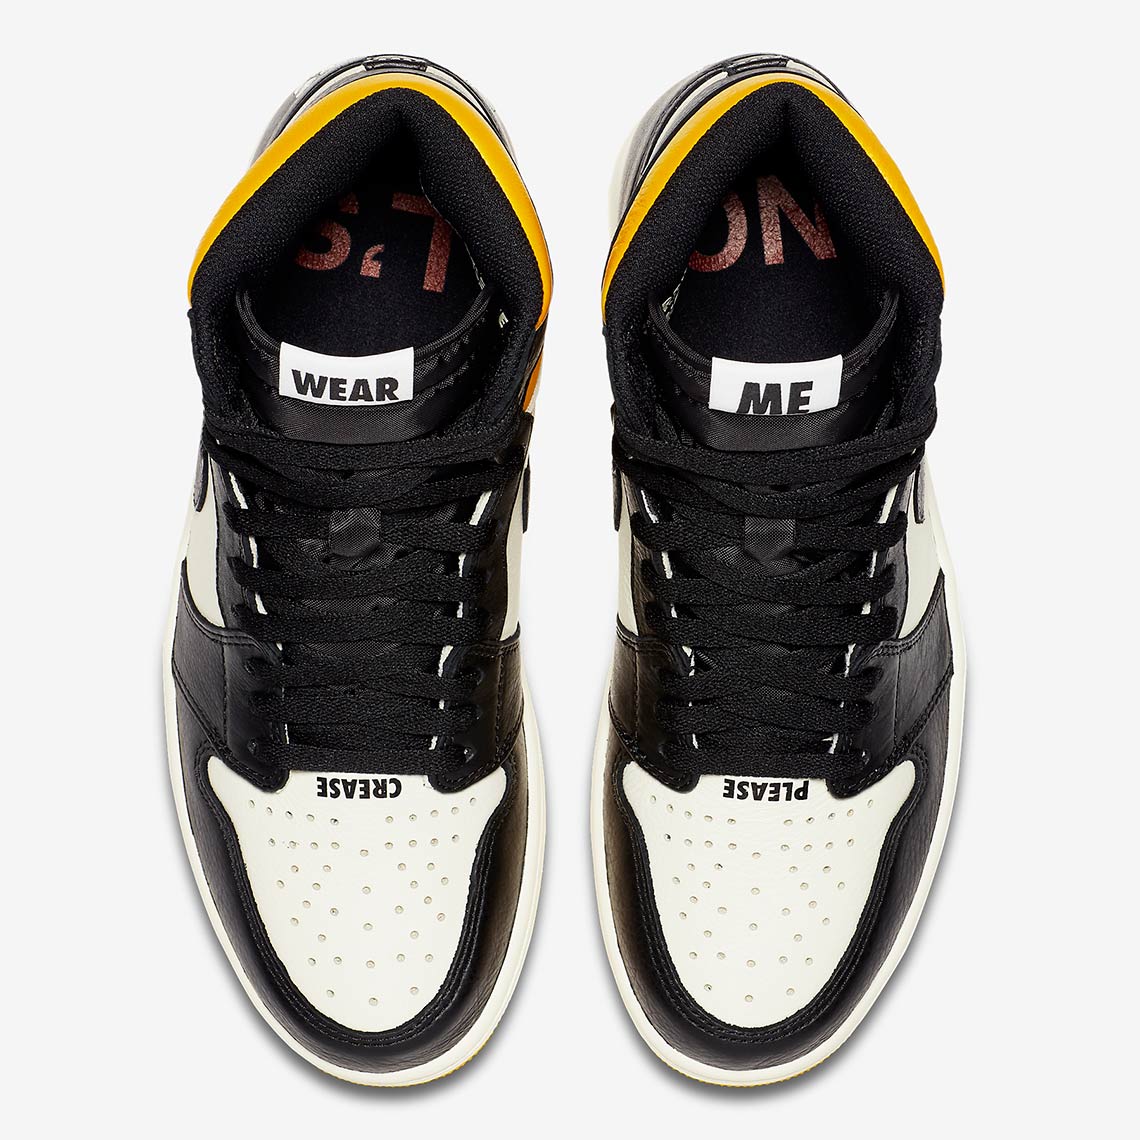 Habitat Out of date Harmony Air Jordan 1 Not For Resale 861428-107 Release Info | SneakerNews.com